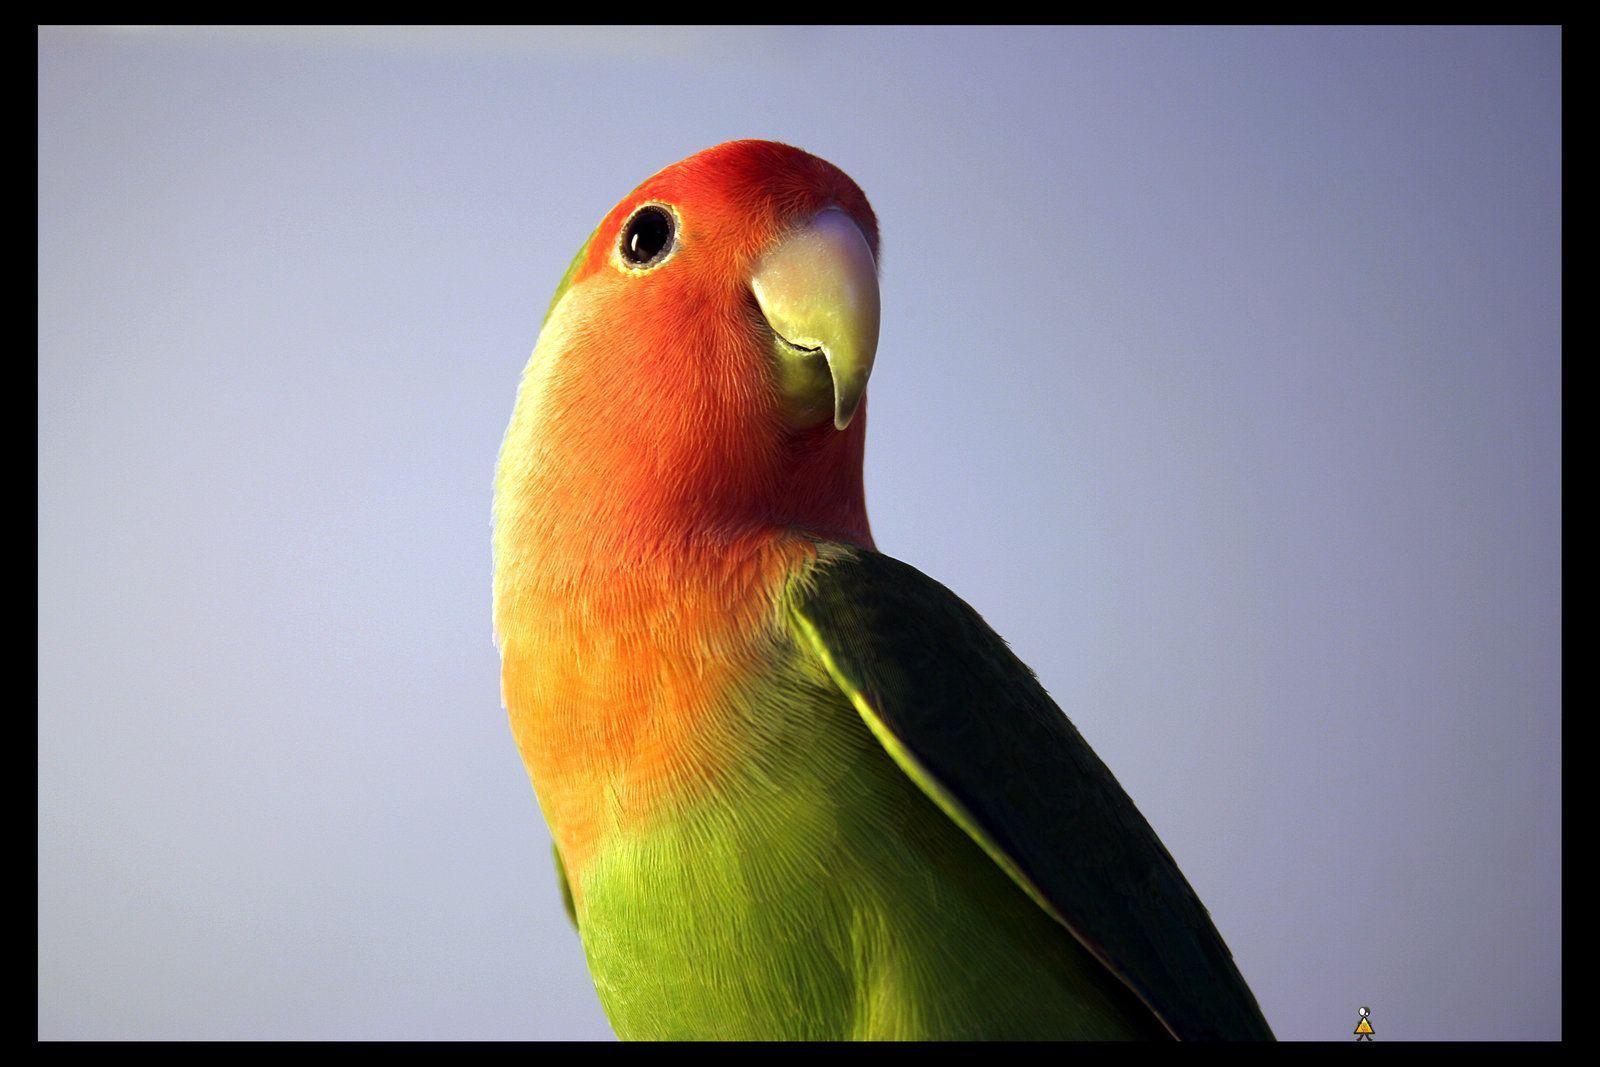 My love bird &quot;Chiw chiw&quot;